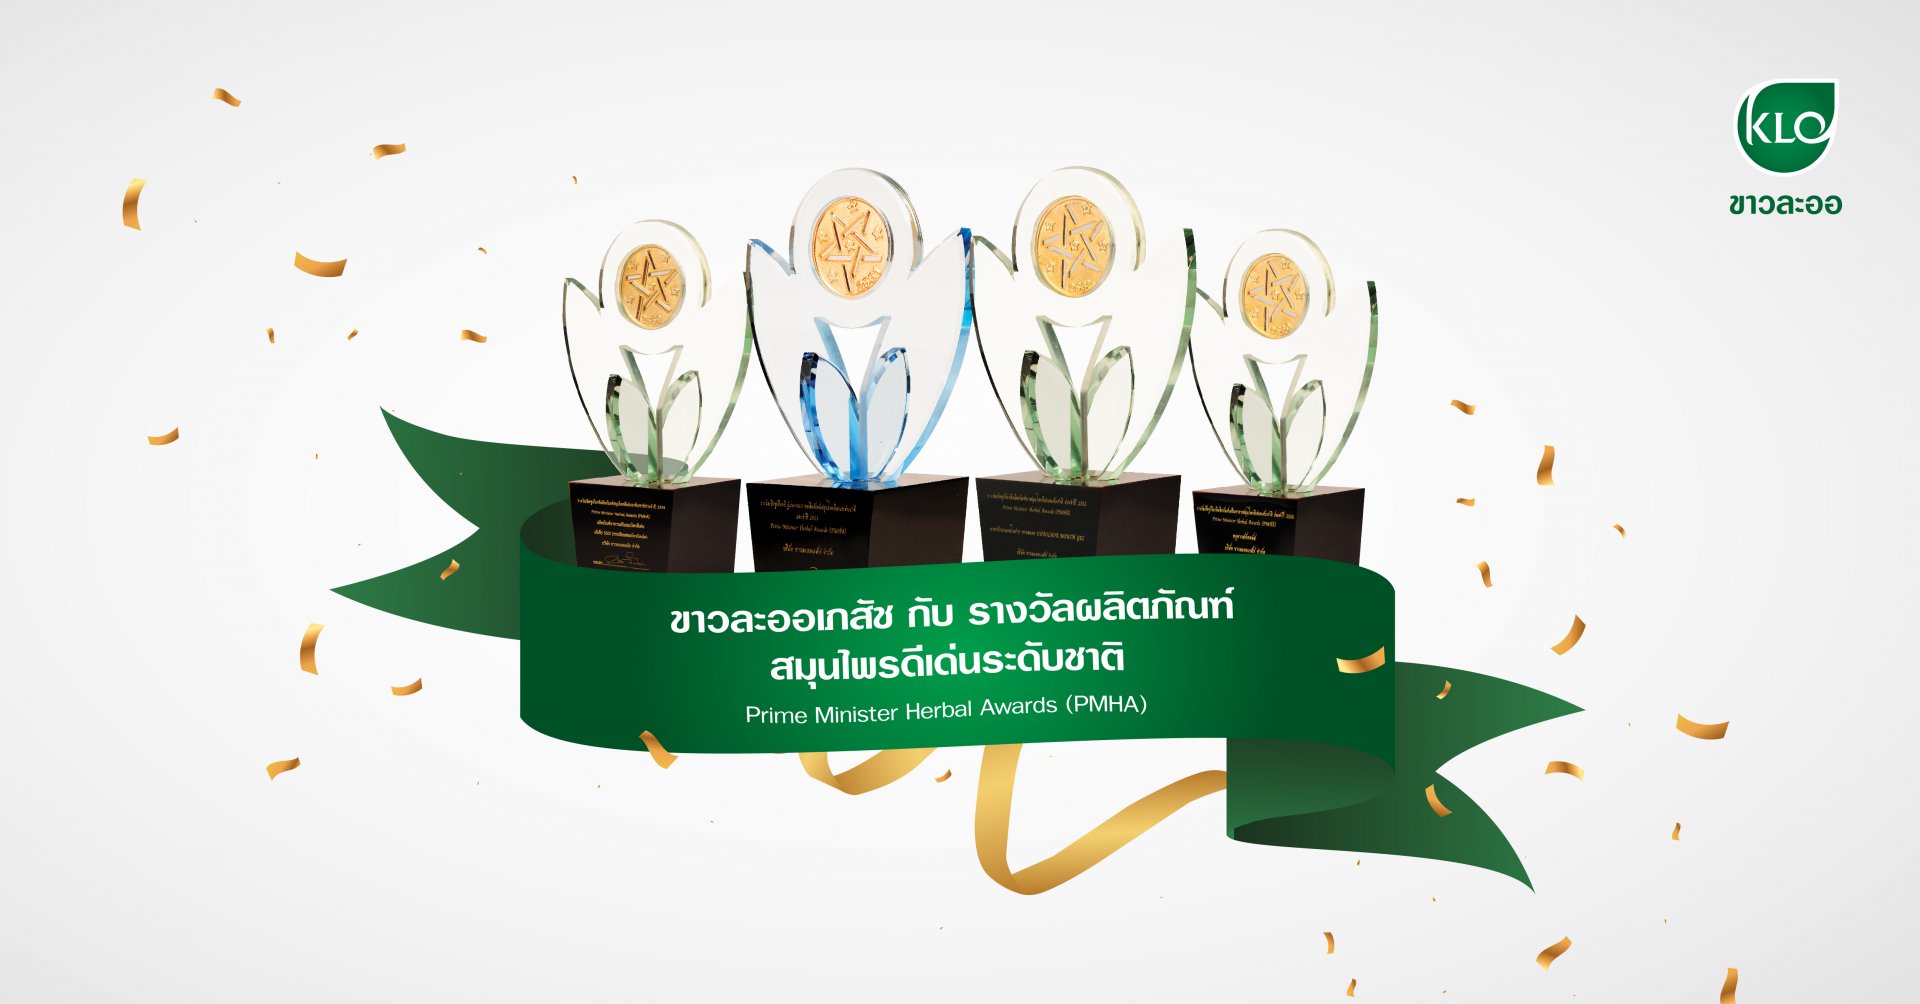 Khao La-Or Pharmacy with the National Outstanding Herbal Product Award Prime Minister Herbal Awards (PMHA)